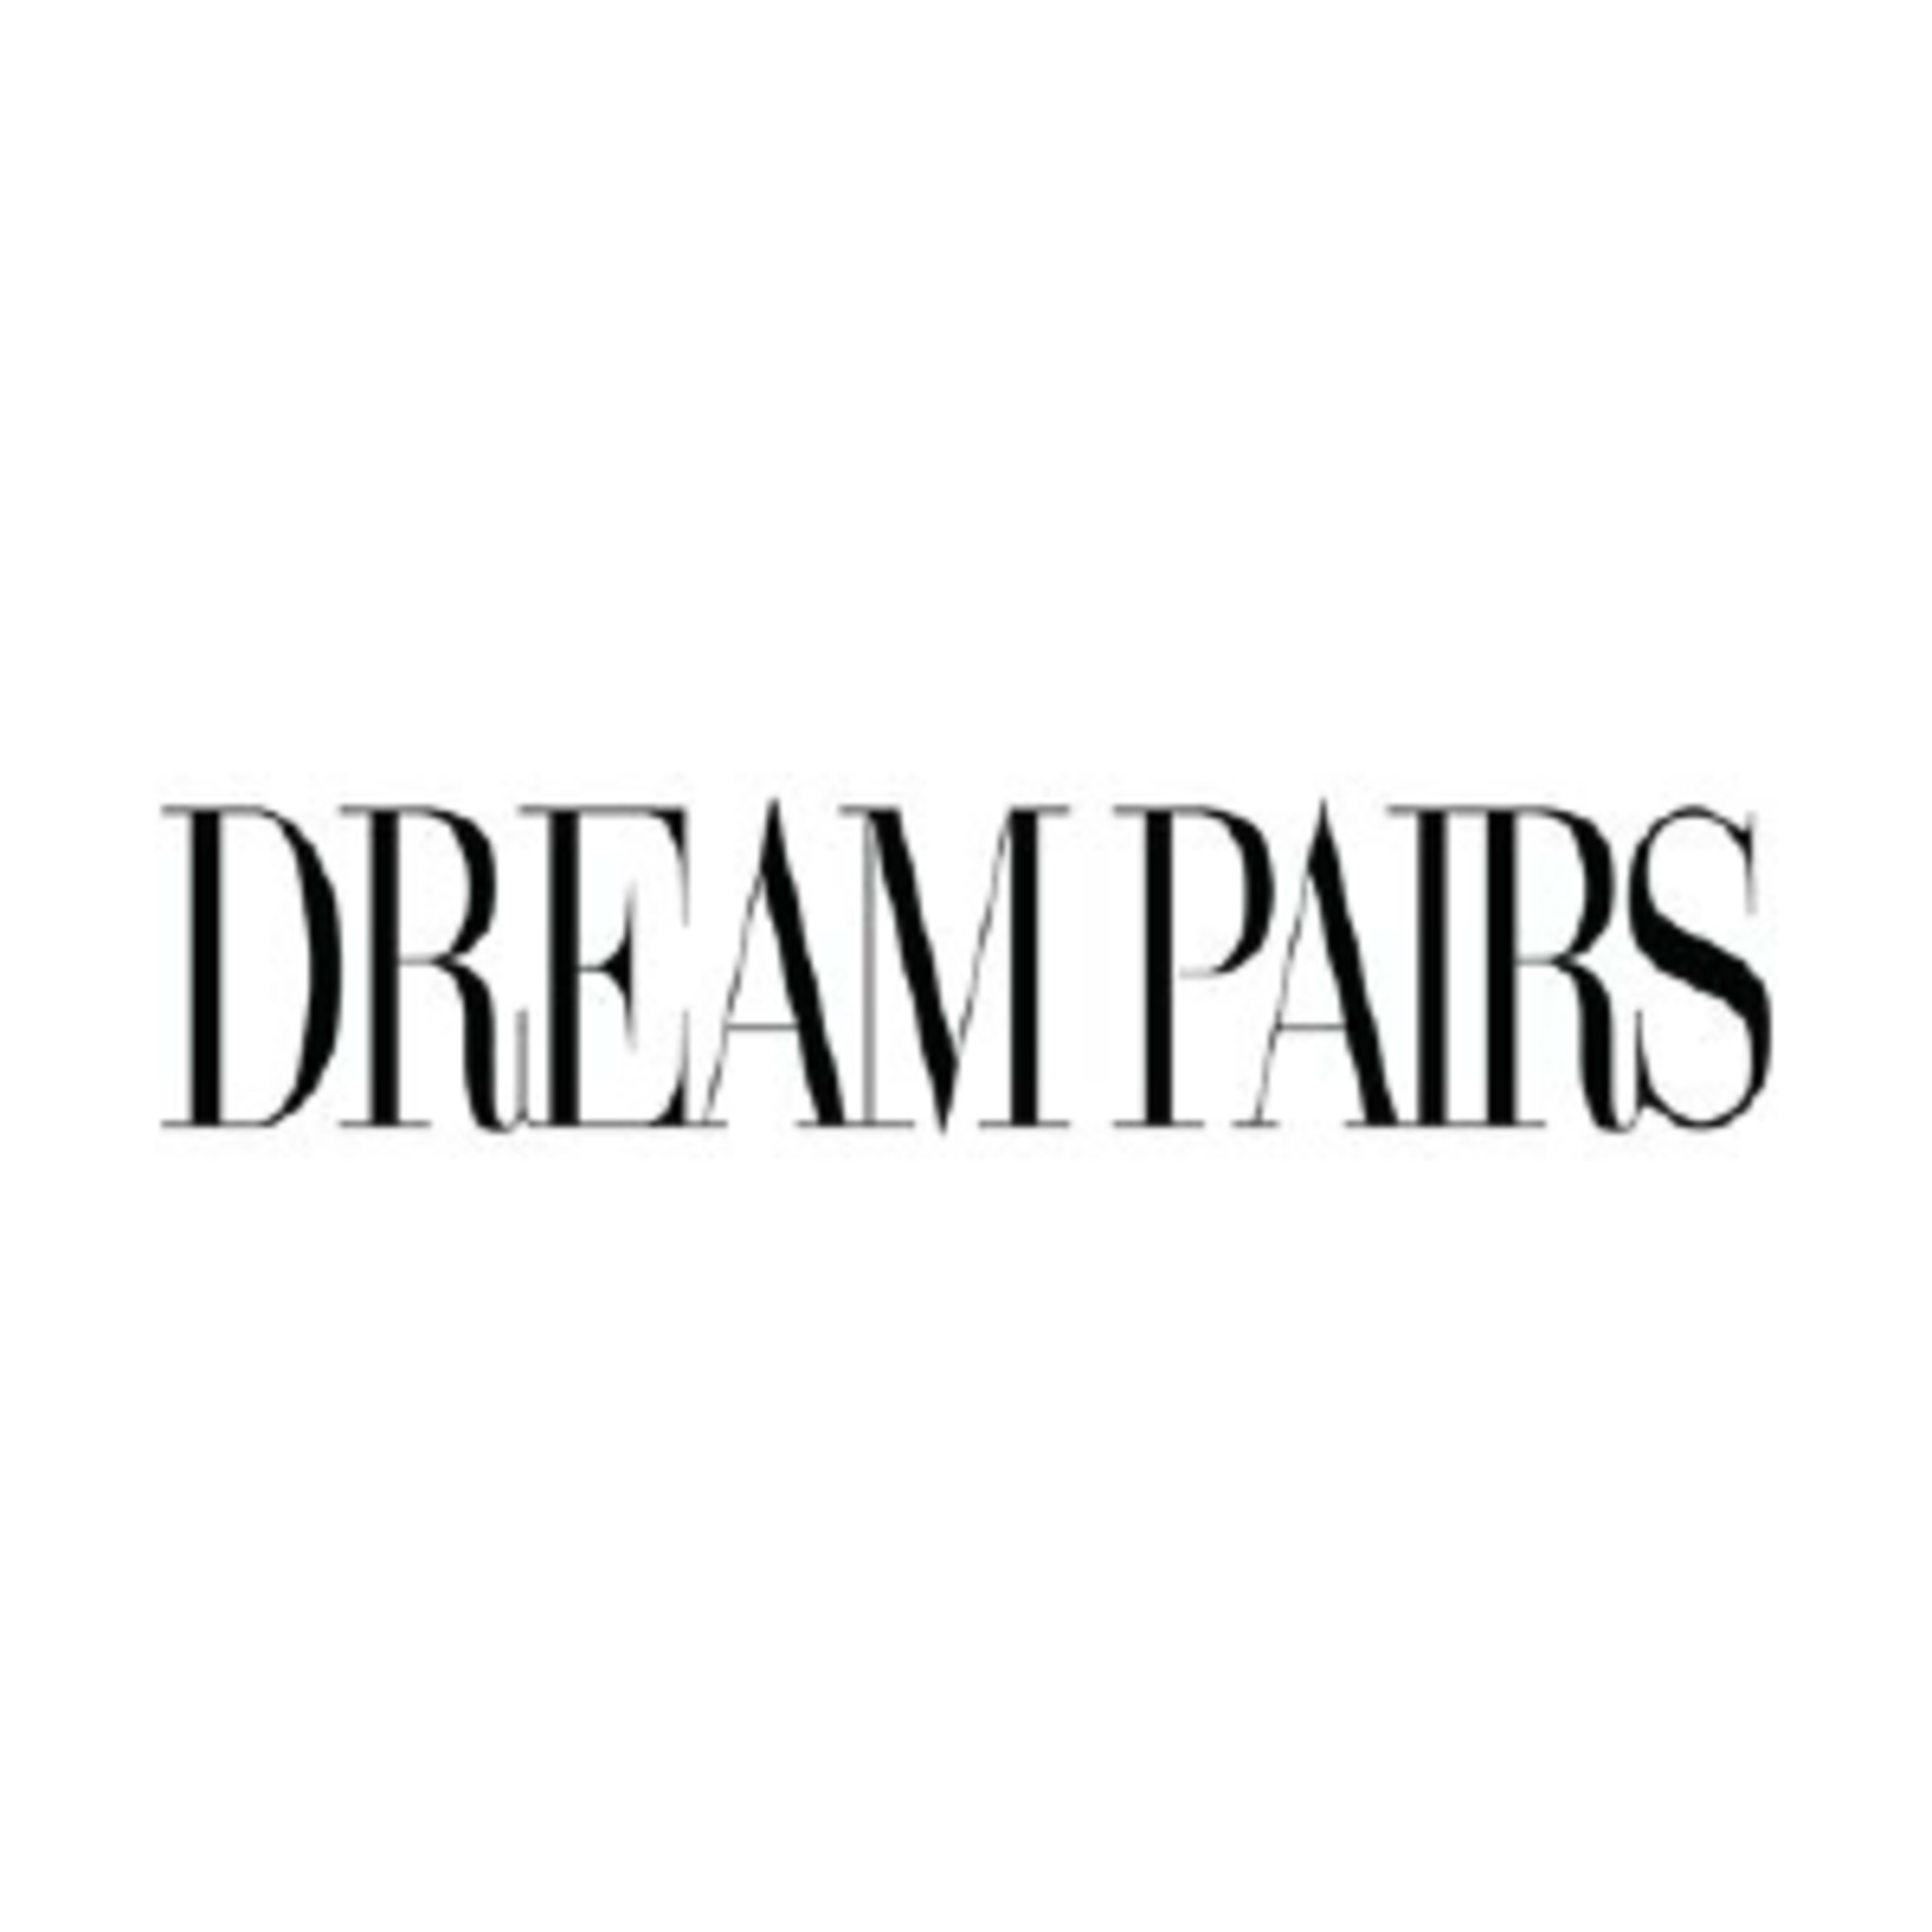 Dream Pairs, Bruno Marc, & Nortiv 8 Shoes (Top Glory Trading Group Inc)Code